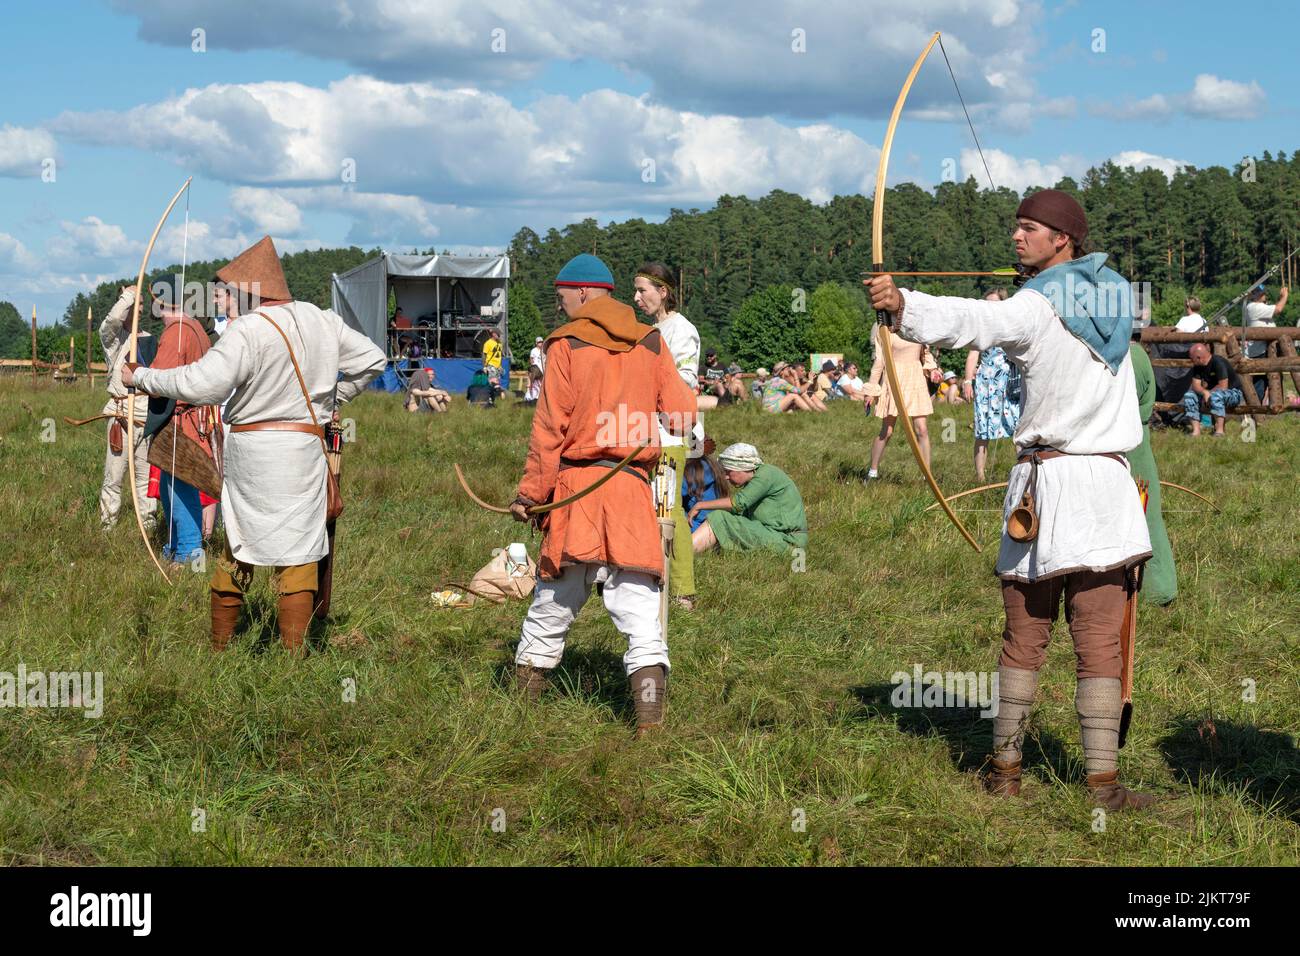 TVER REGION, RUSSIA - JULY 22, 2022: On the archery tournament. Historical festival of 'Epic Coast 2022' Stock Photo